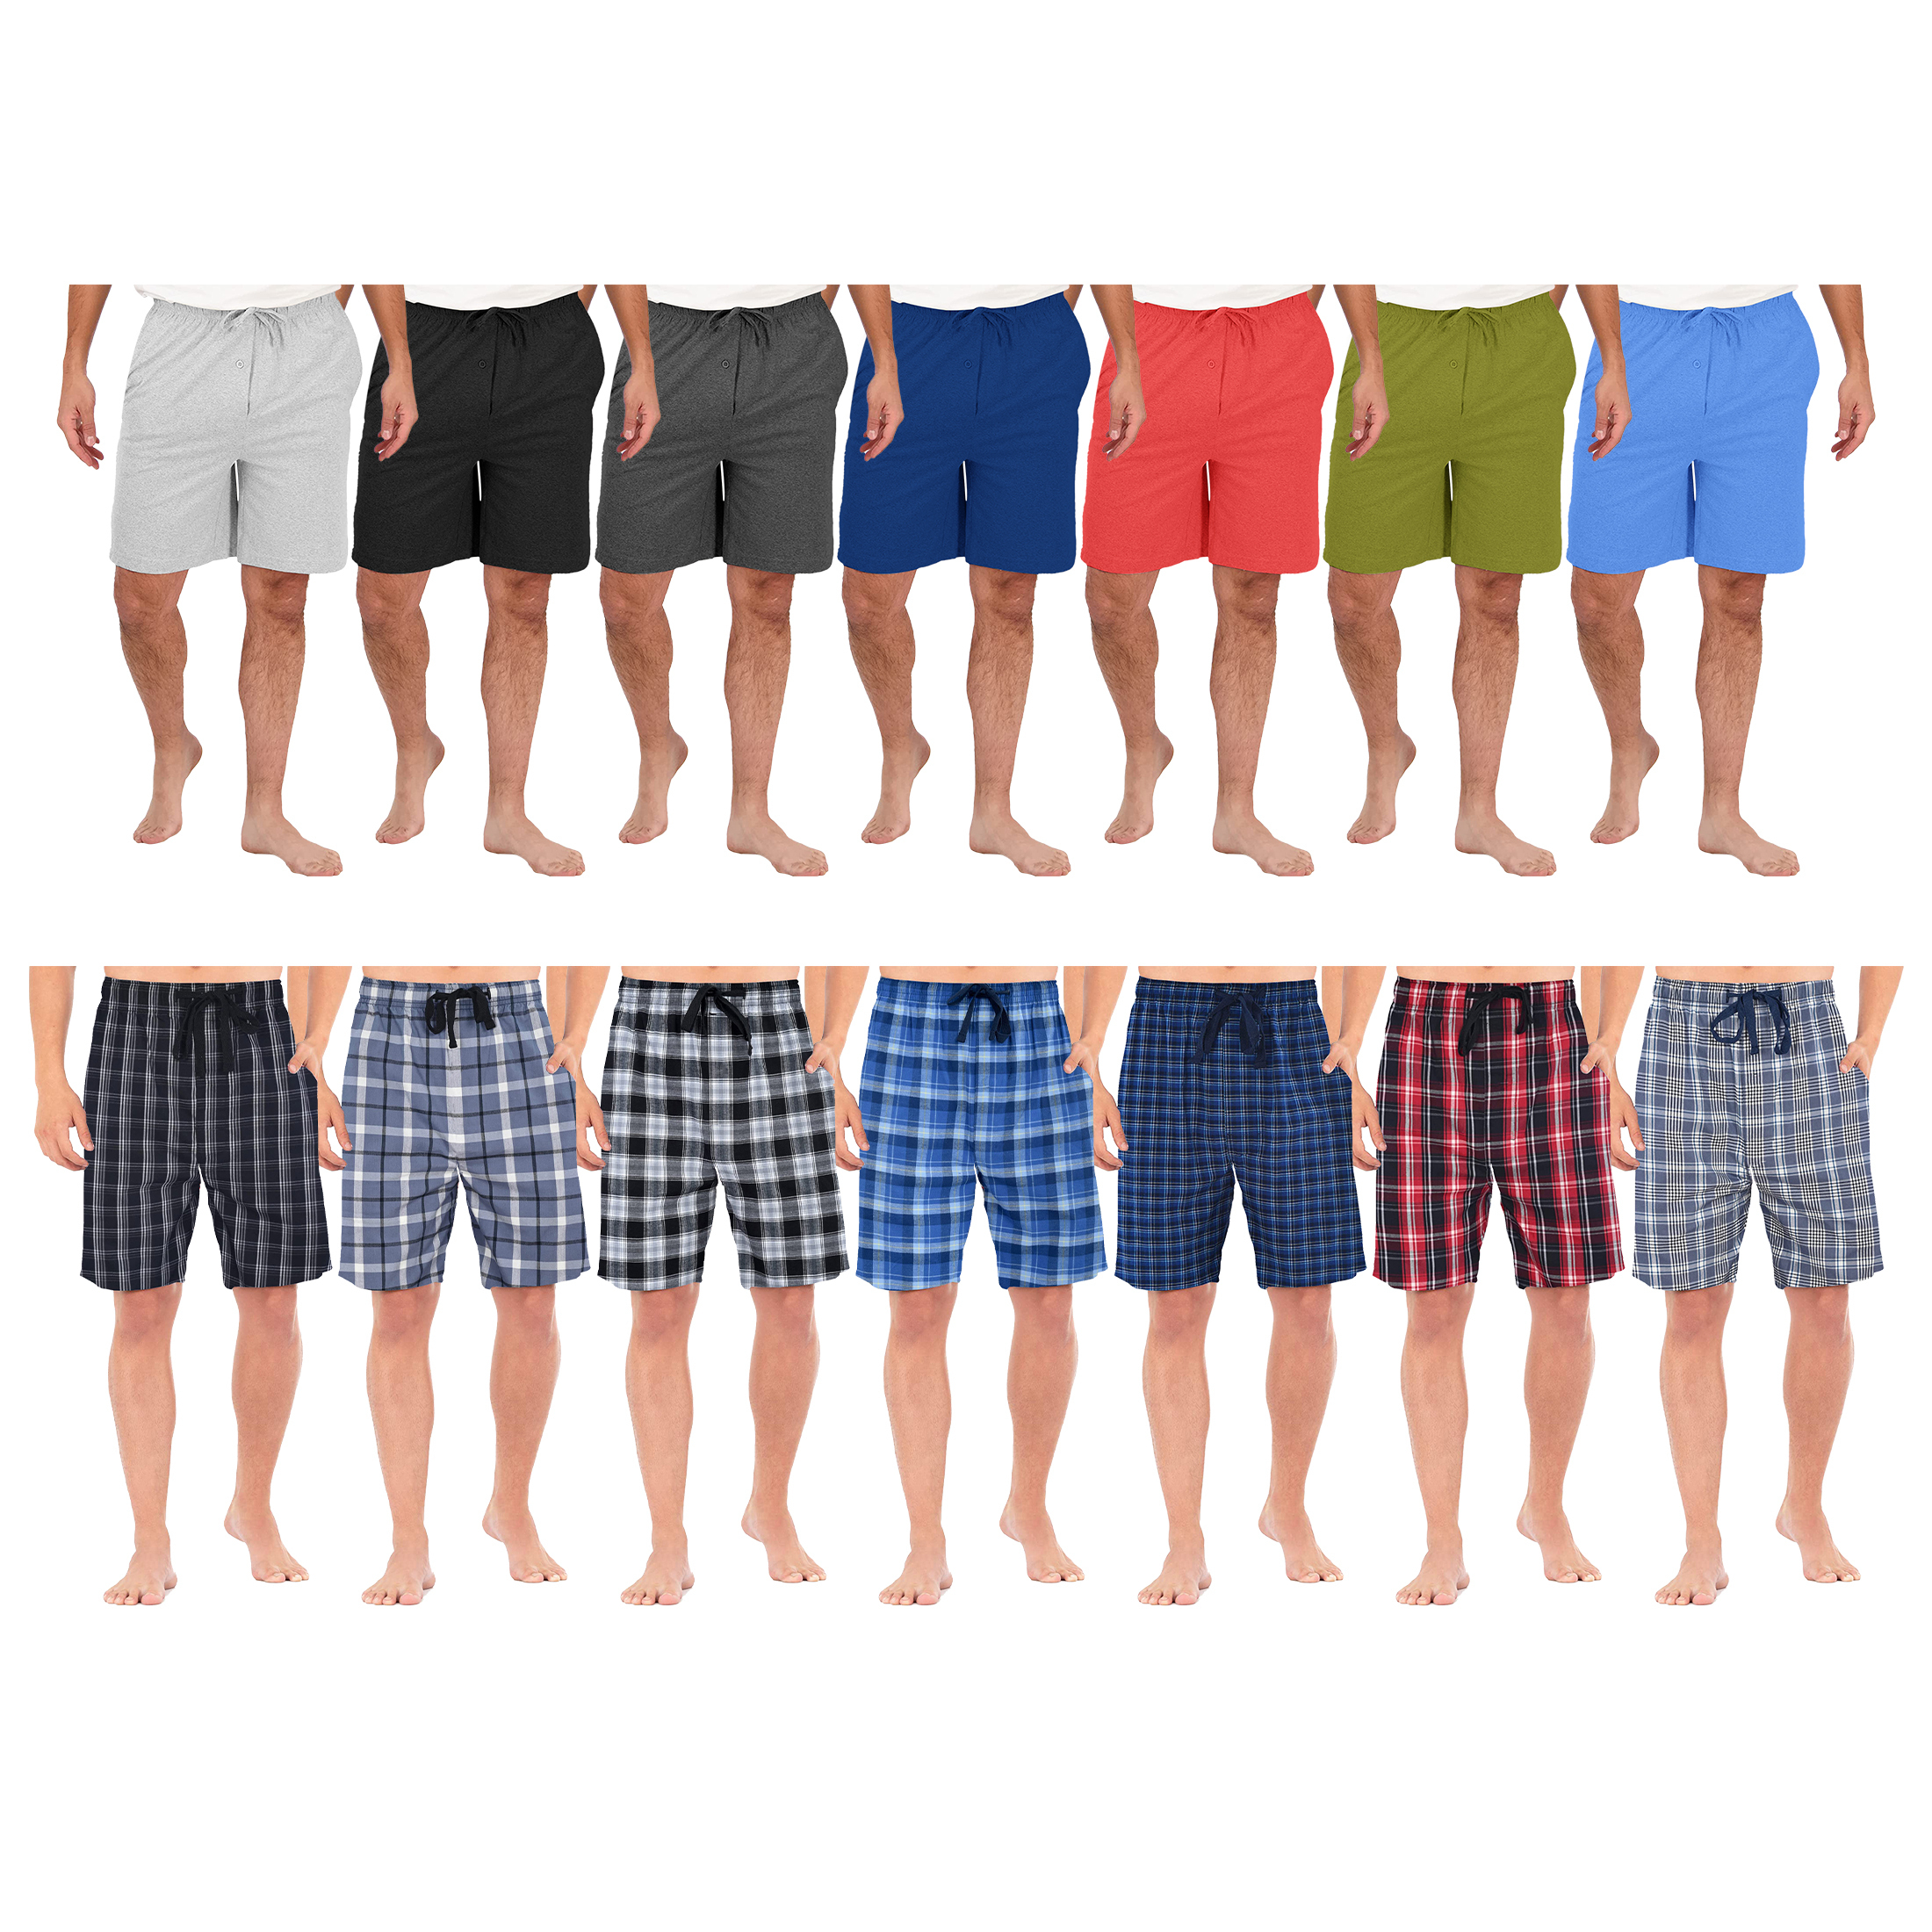 Multi-Pack: Men's Ultra-Soft Jersey Knit Sleep Lounge Pajama Shorts For Sleepwear - Solid & Plaid, 3 Pack, Large